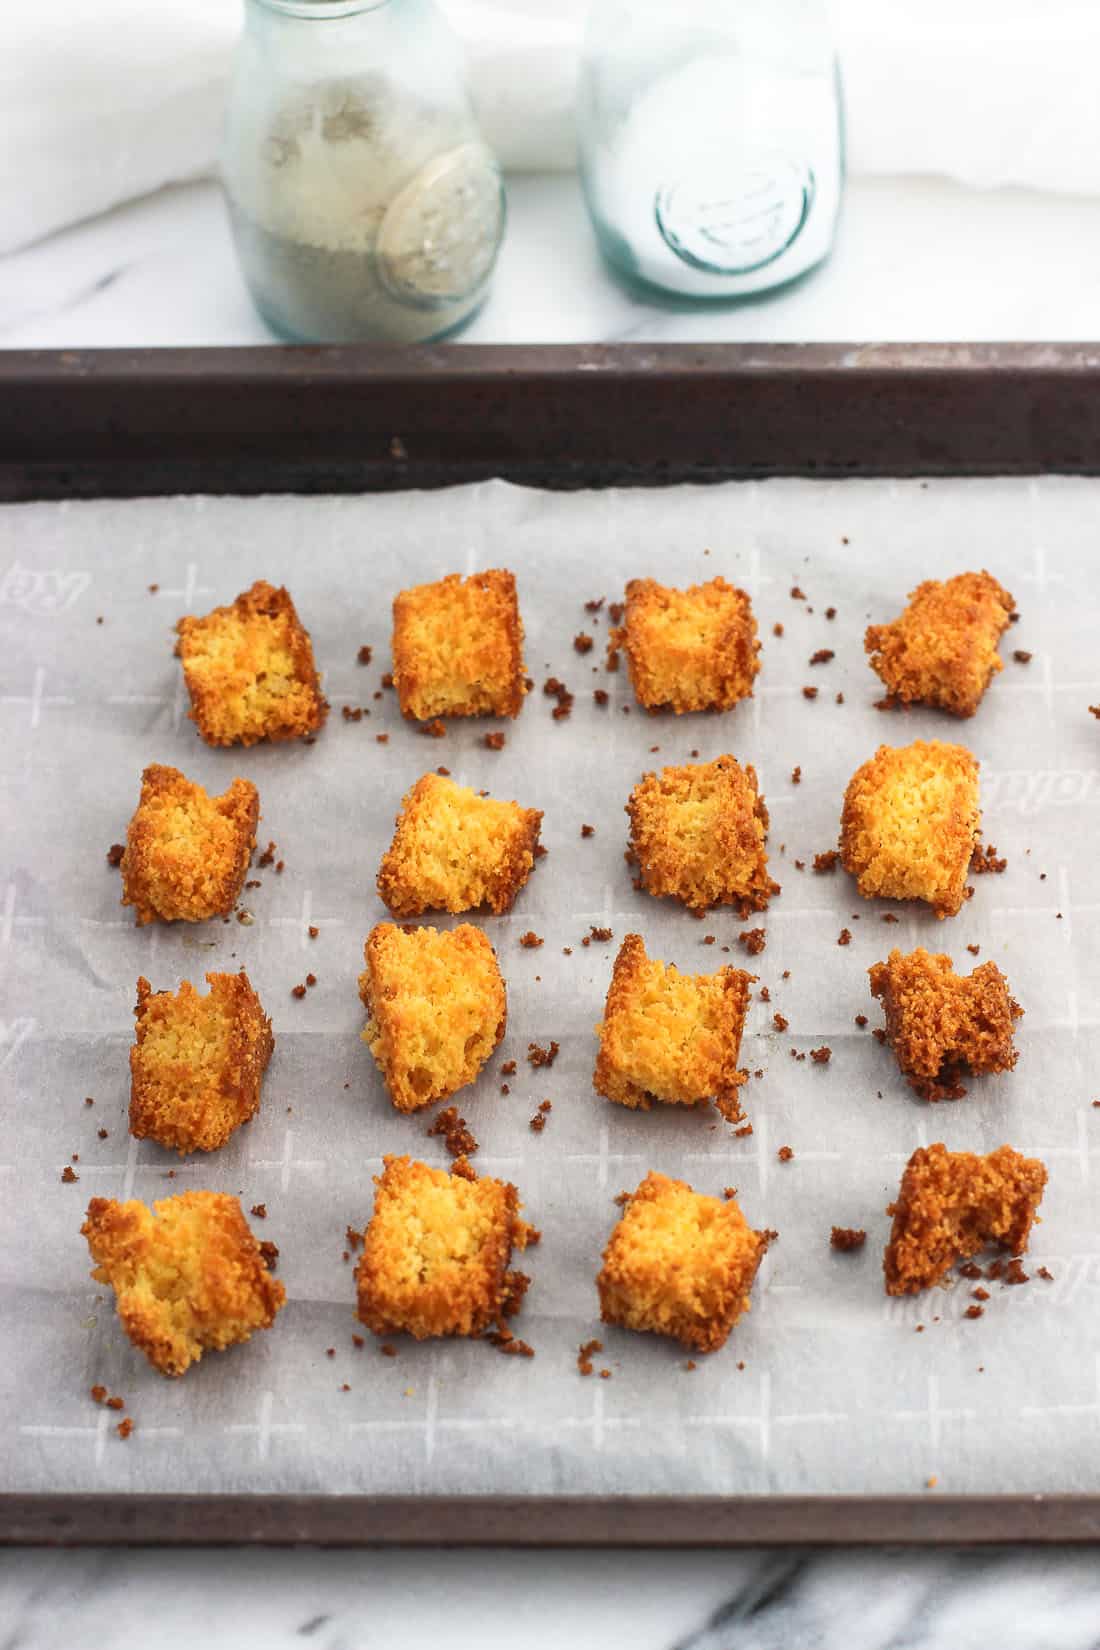 How to Make Cornbread Croutons